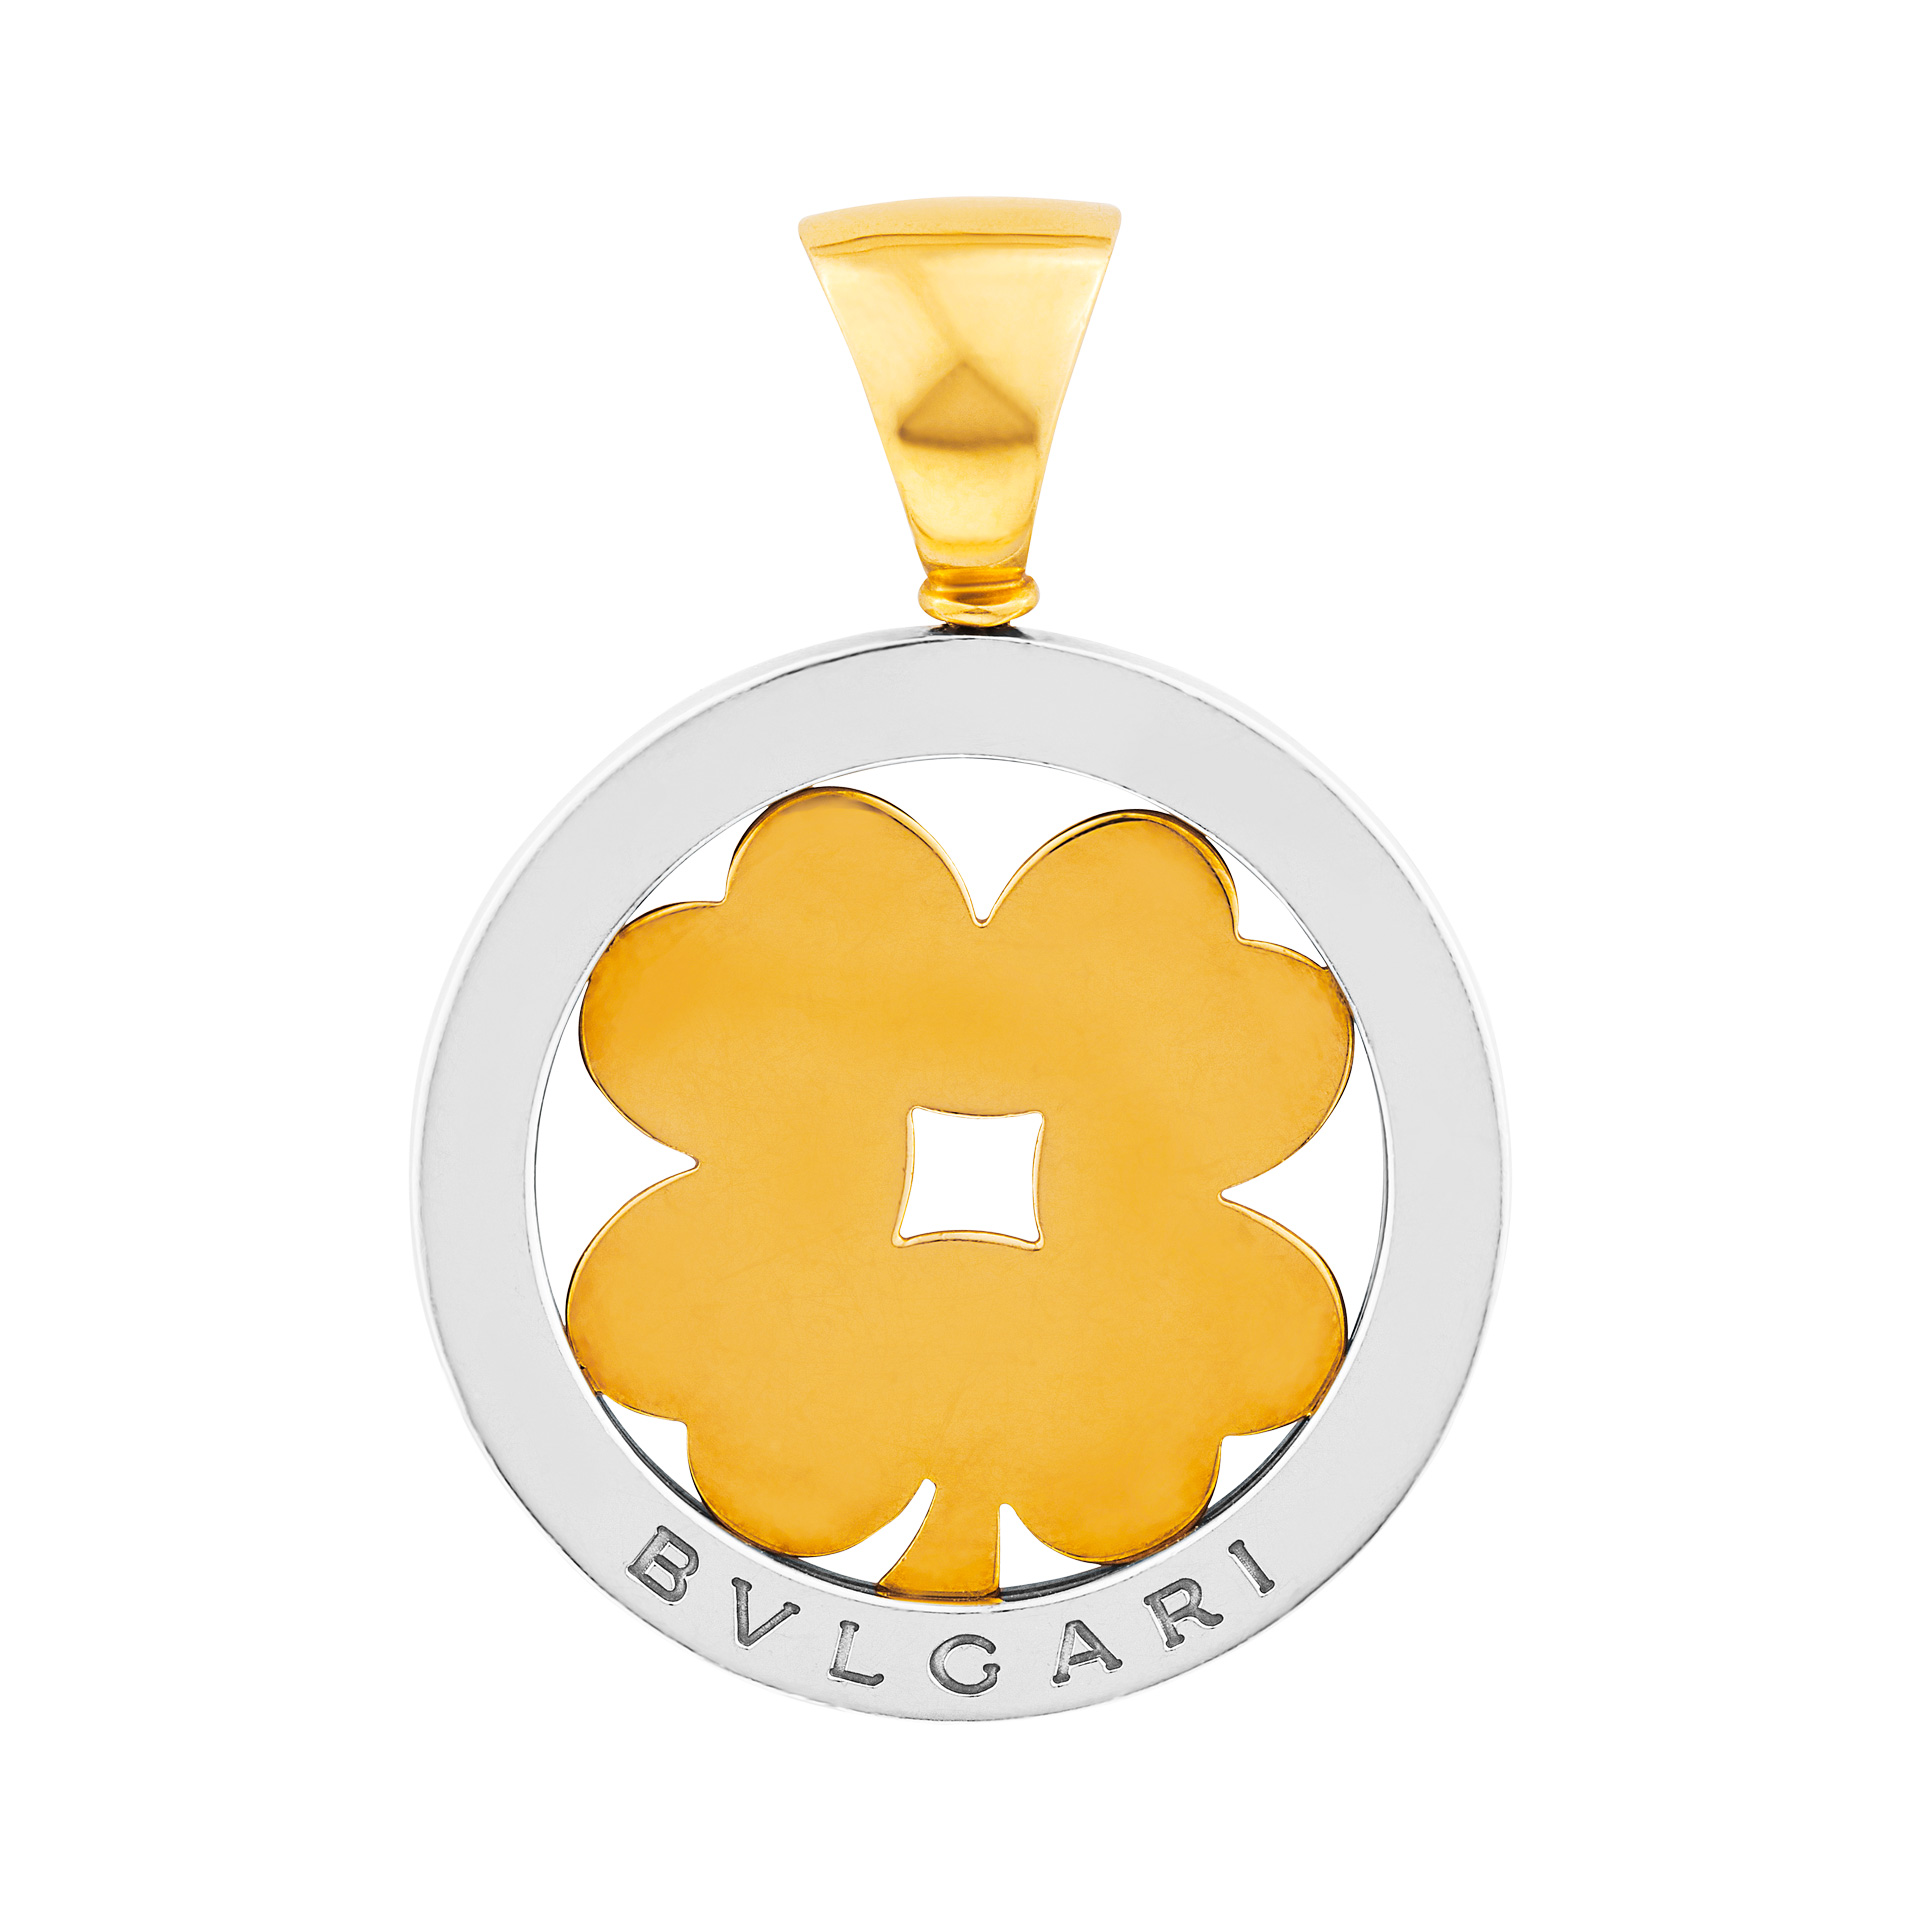 Bvlgari "Clover" luck pendant in 18k and steel image 1